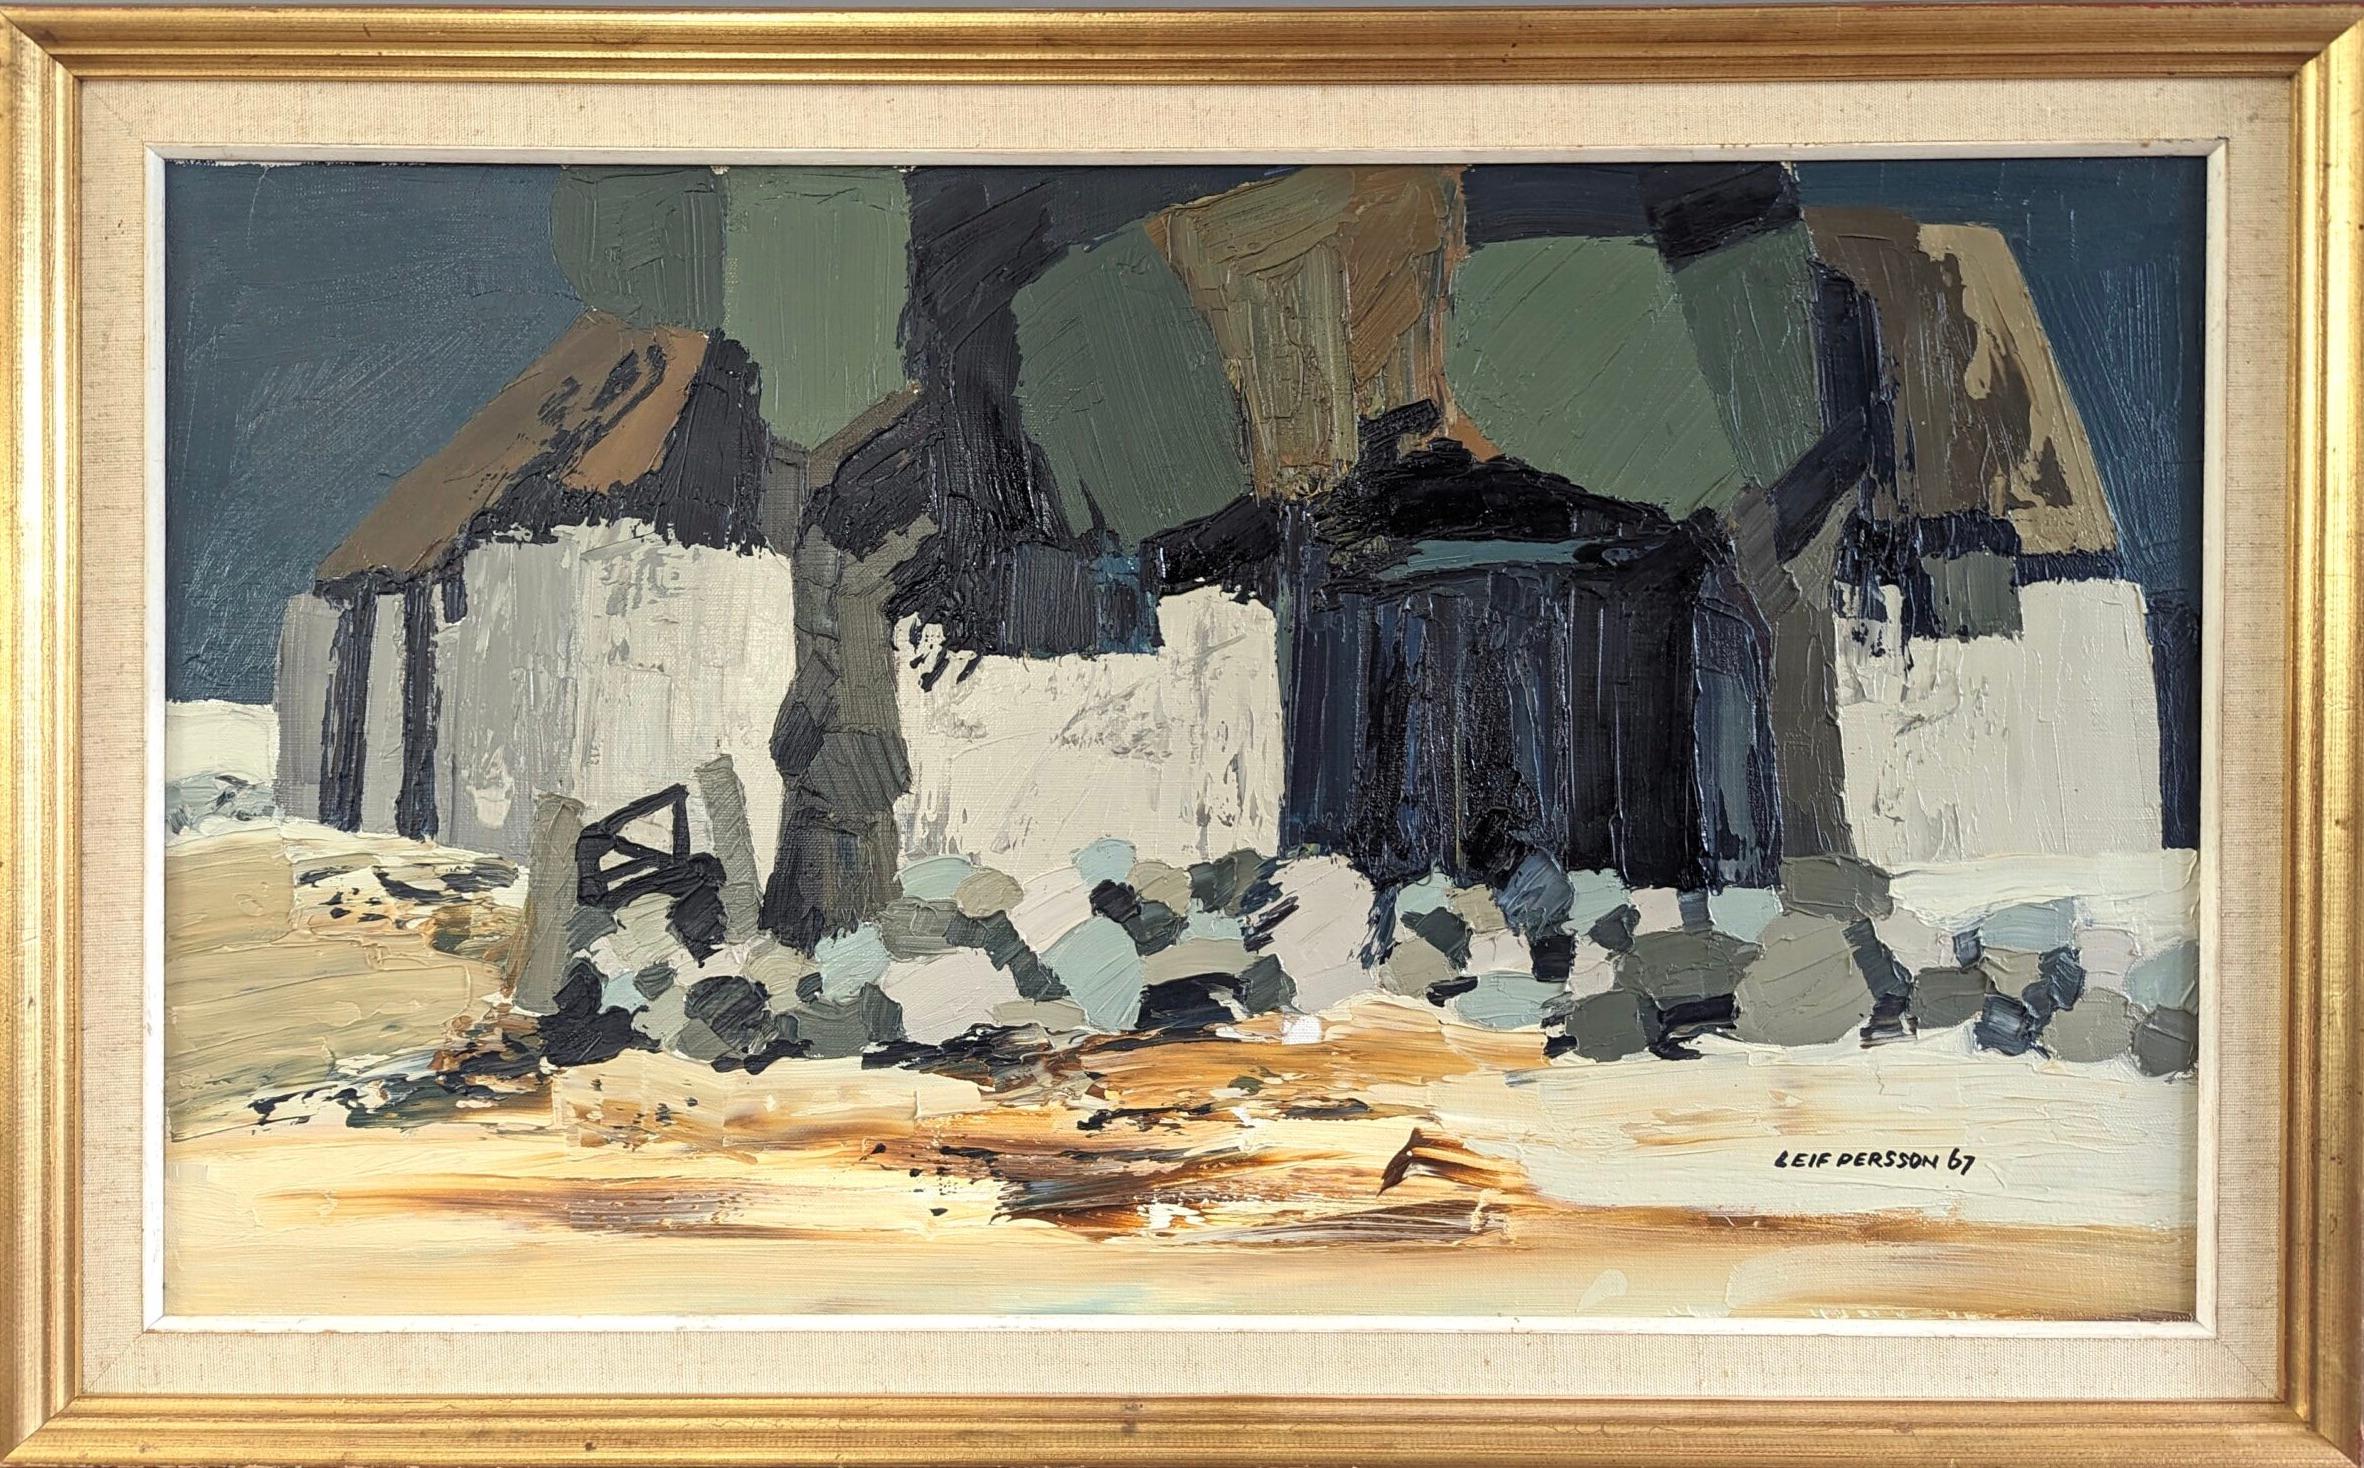 Unknown Landscape Painting - 1967 Vintage Mid-Century Abstract Landscape Oil Painting - Nature Dwellings